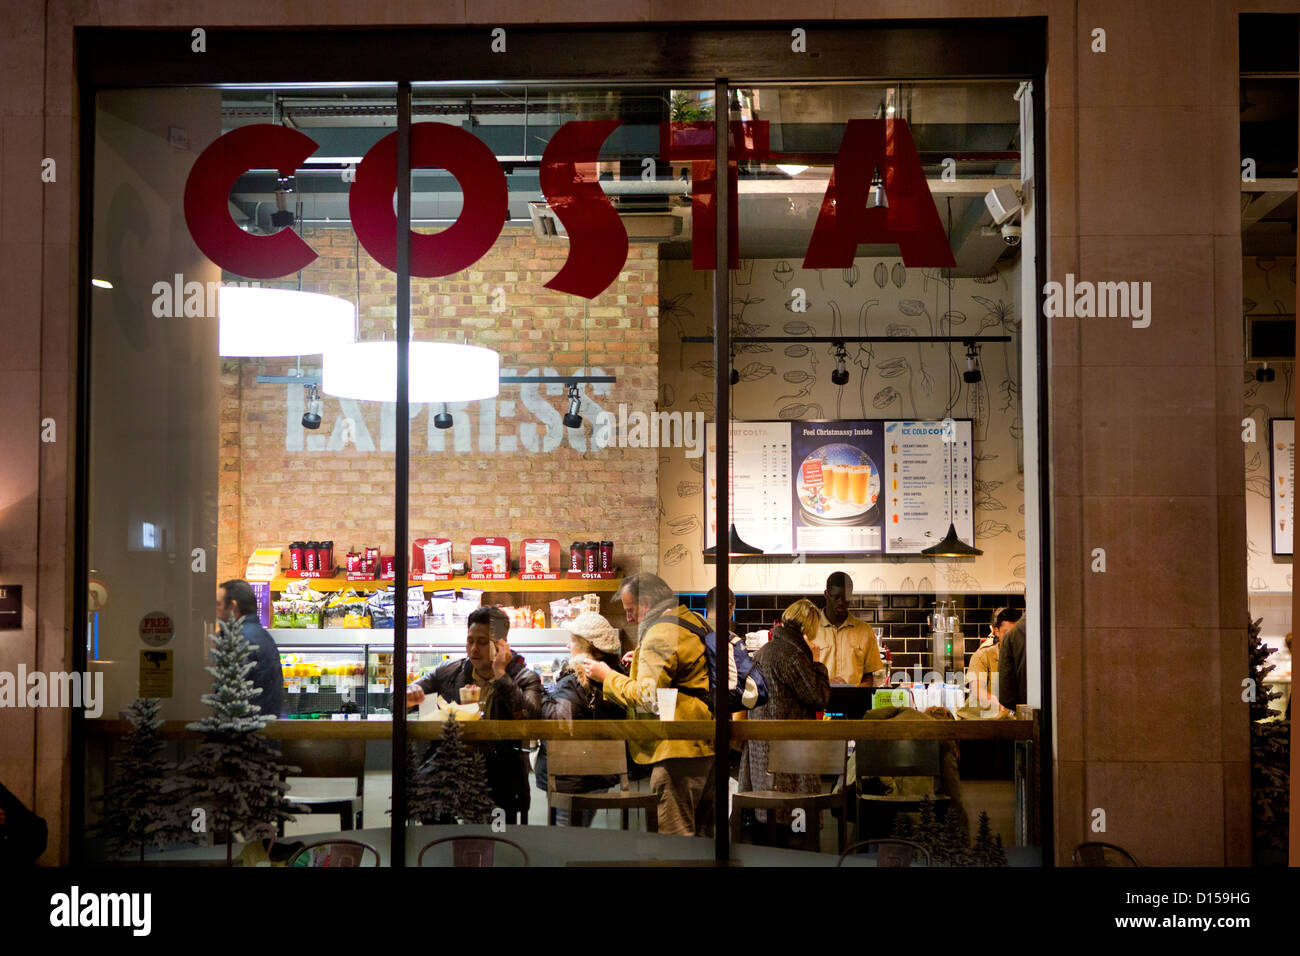 A Costa coffee shop in London. Stock Photo